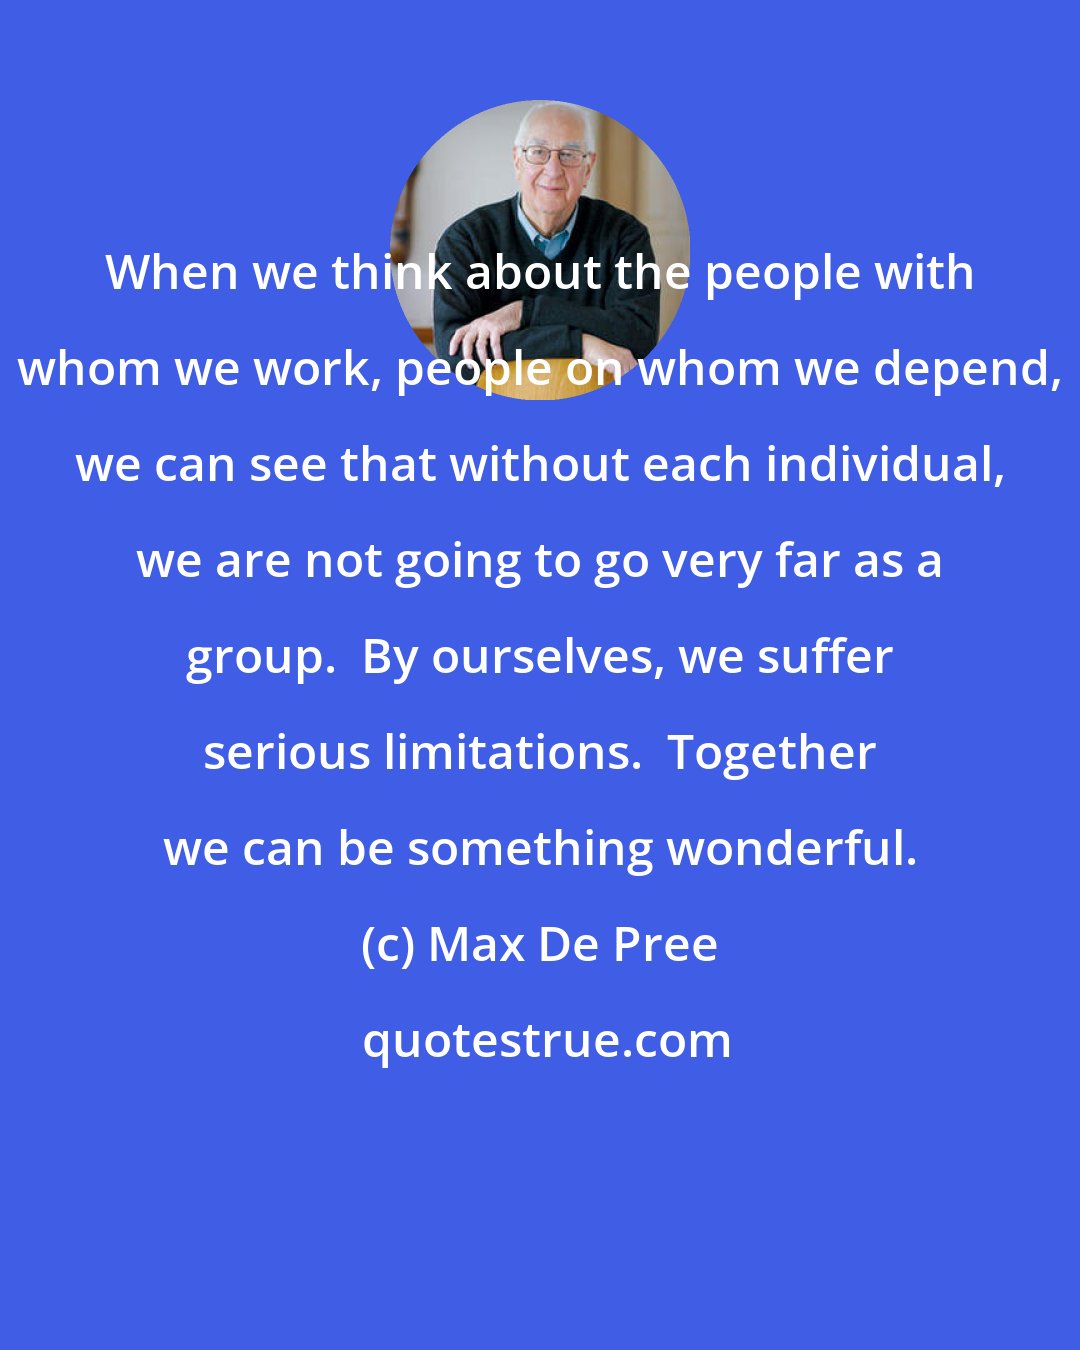 Max De Pree: When we think about the people with whom we work, people on whom we depend, we can see that without each individual, we are not going to go very far as a group.  By ourselves, we suffer serious limitations.  Together we can be something wonderful.